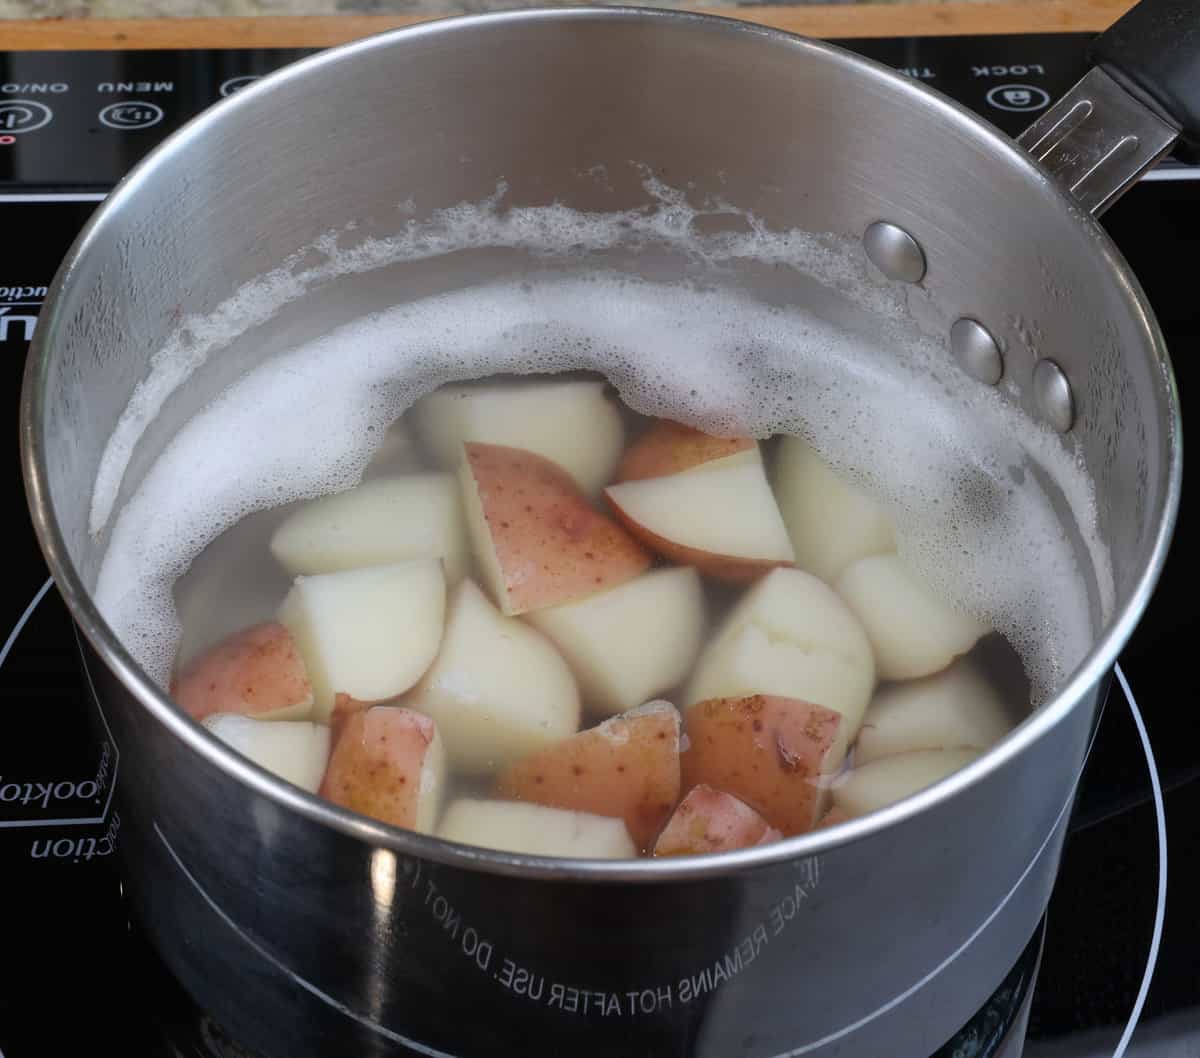 potatoes cooking in a pot of water on the stove.